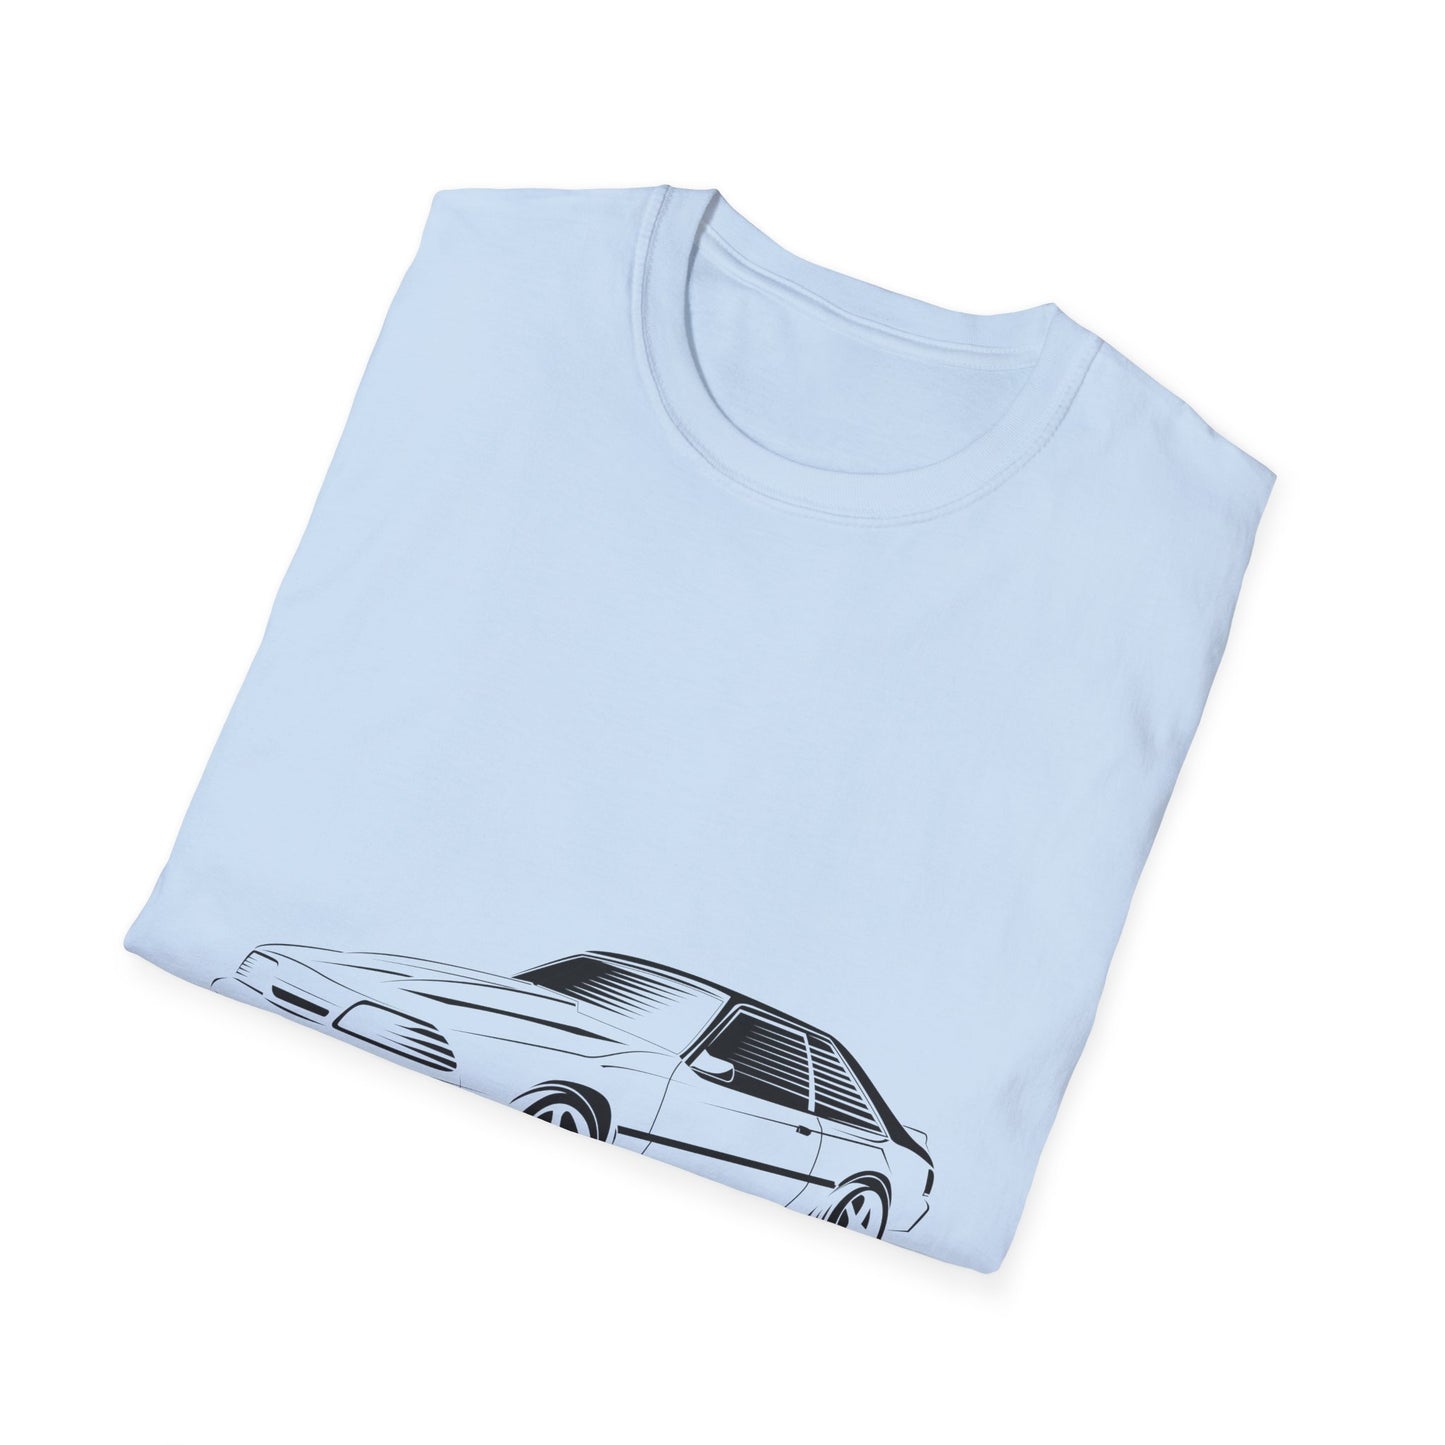 Mustang Ford Old Style Vintage Edition T-Shirt